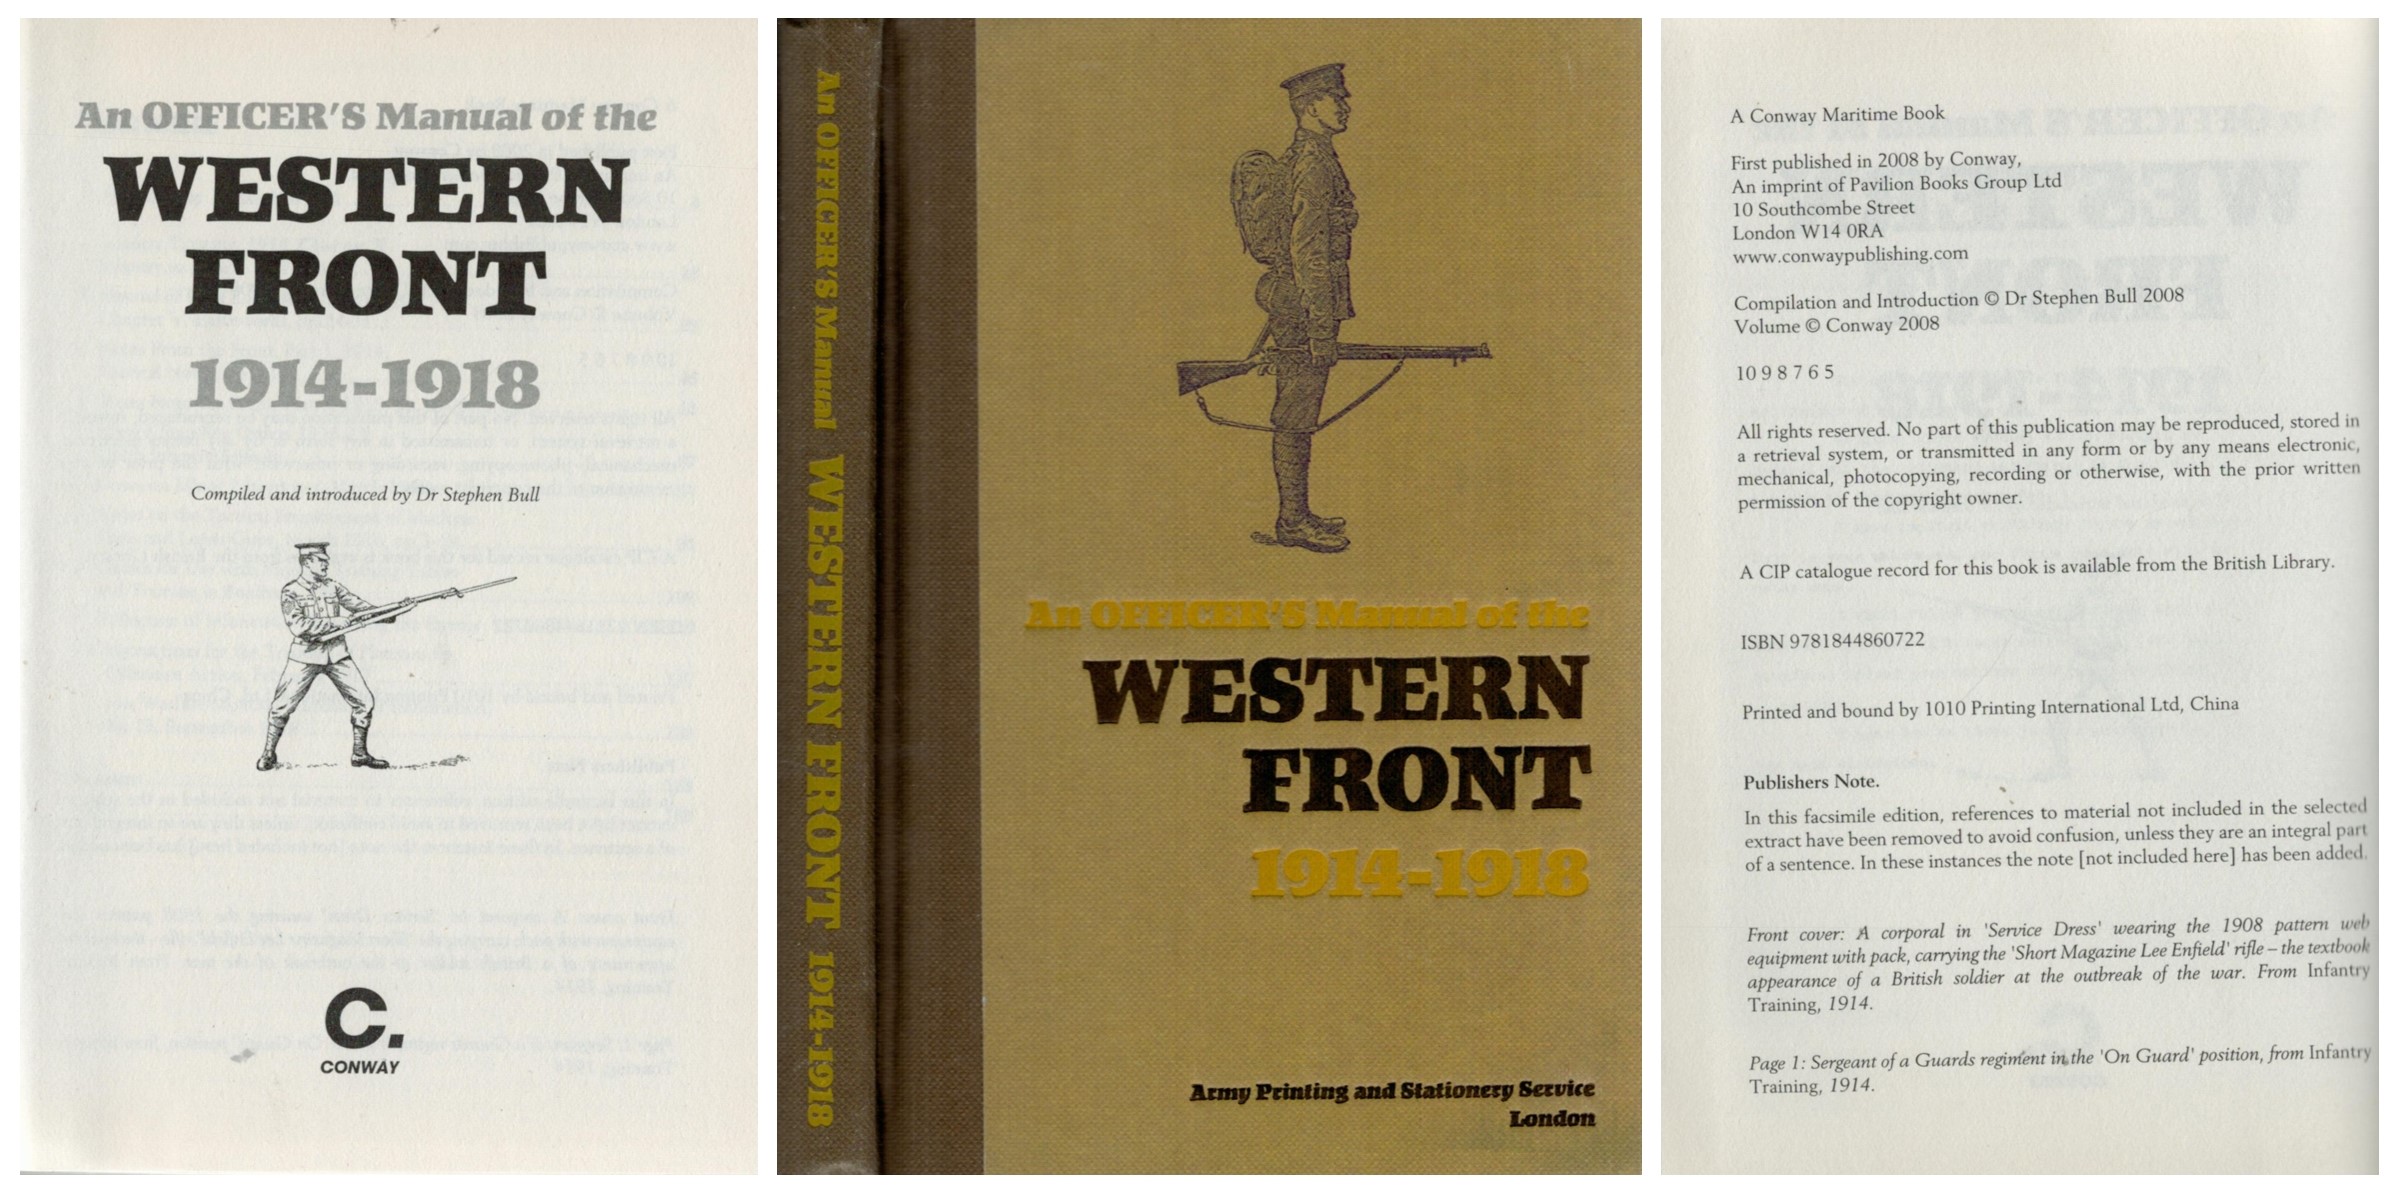 An Officer's Manual of the Western Front 1914-1918 Hardcover book unsigned. Complied and